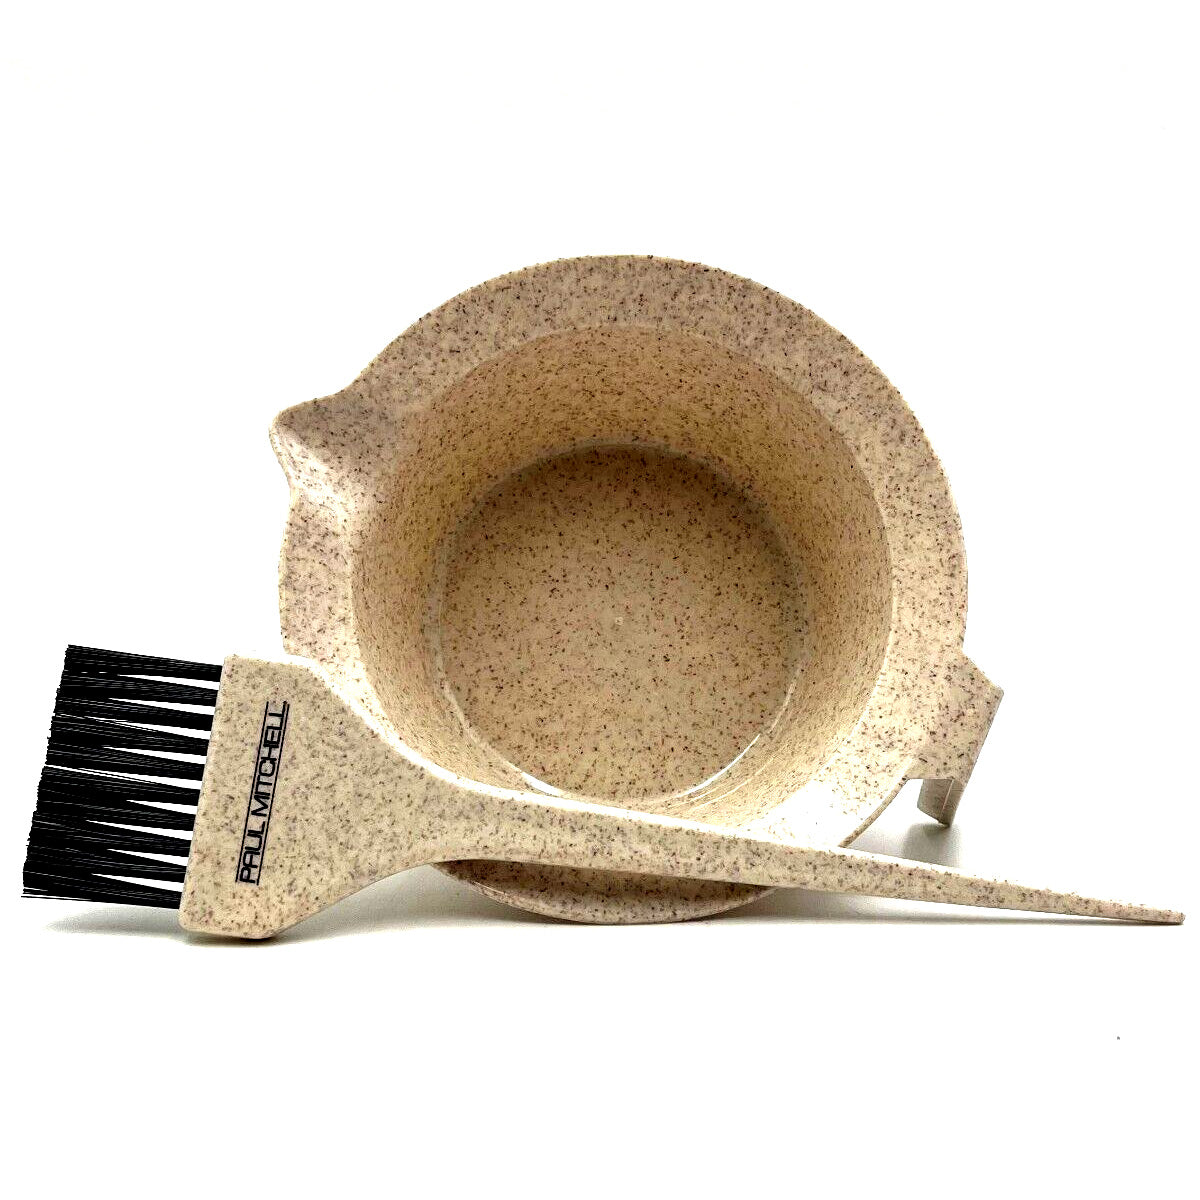 Paul Mitchell Hair Color Mixing Bowl and Brush Set